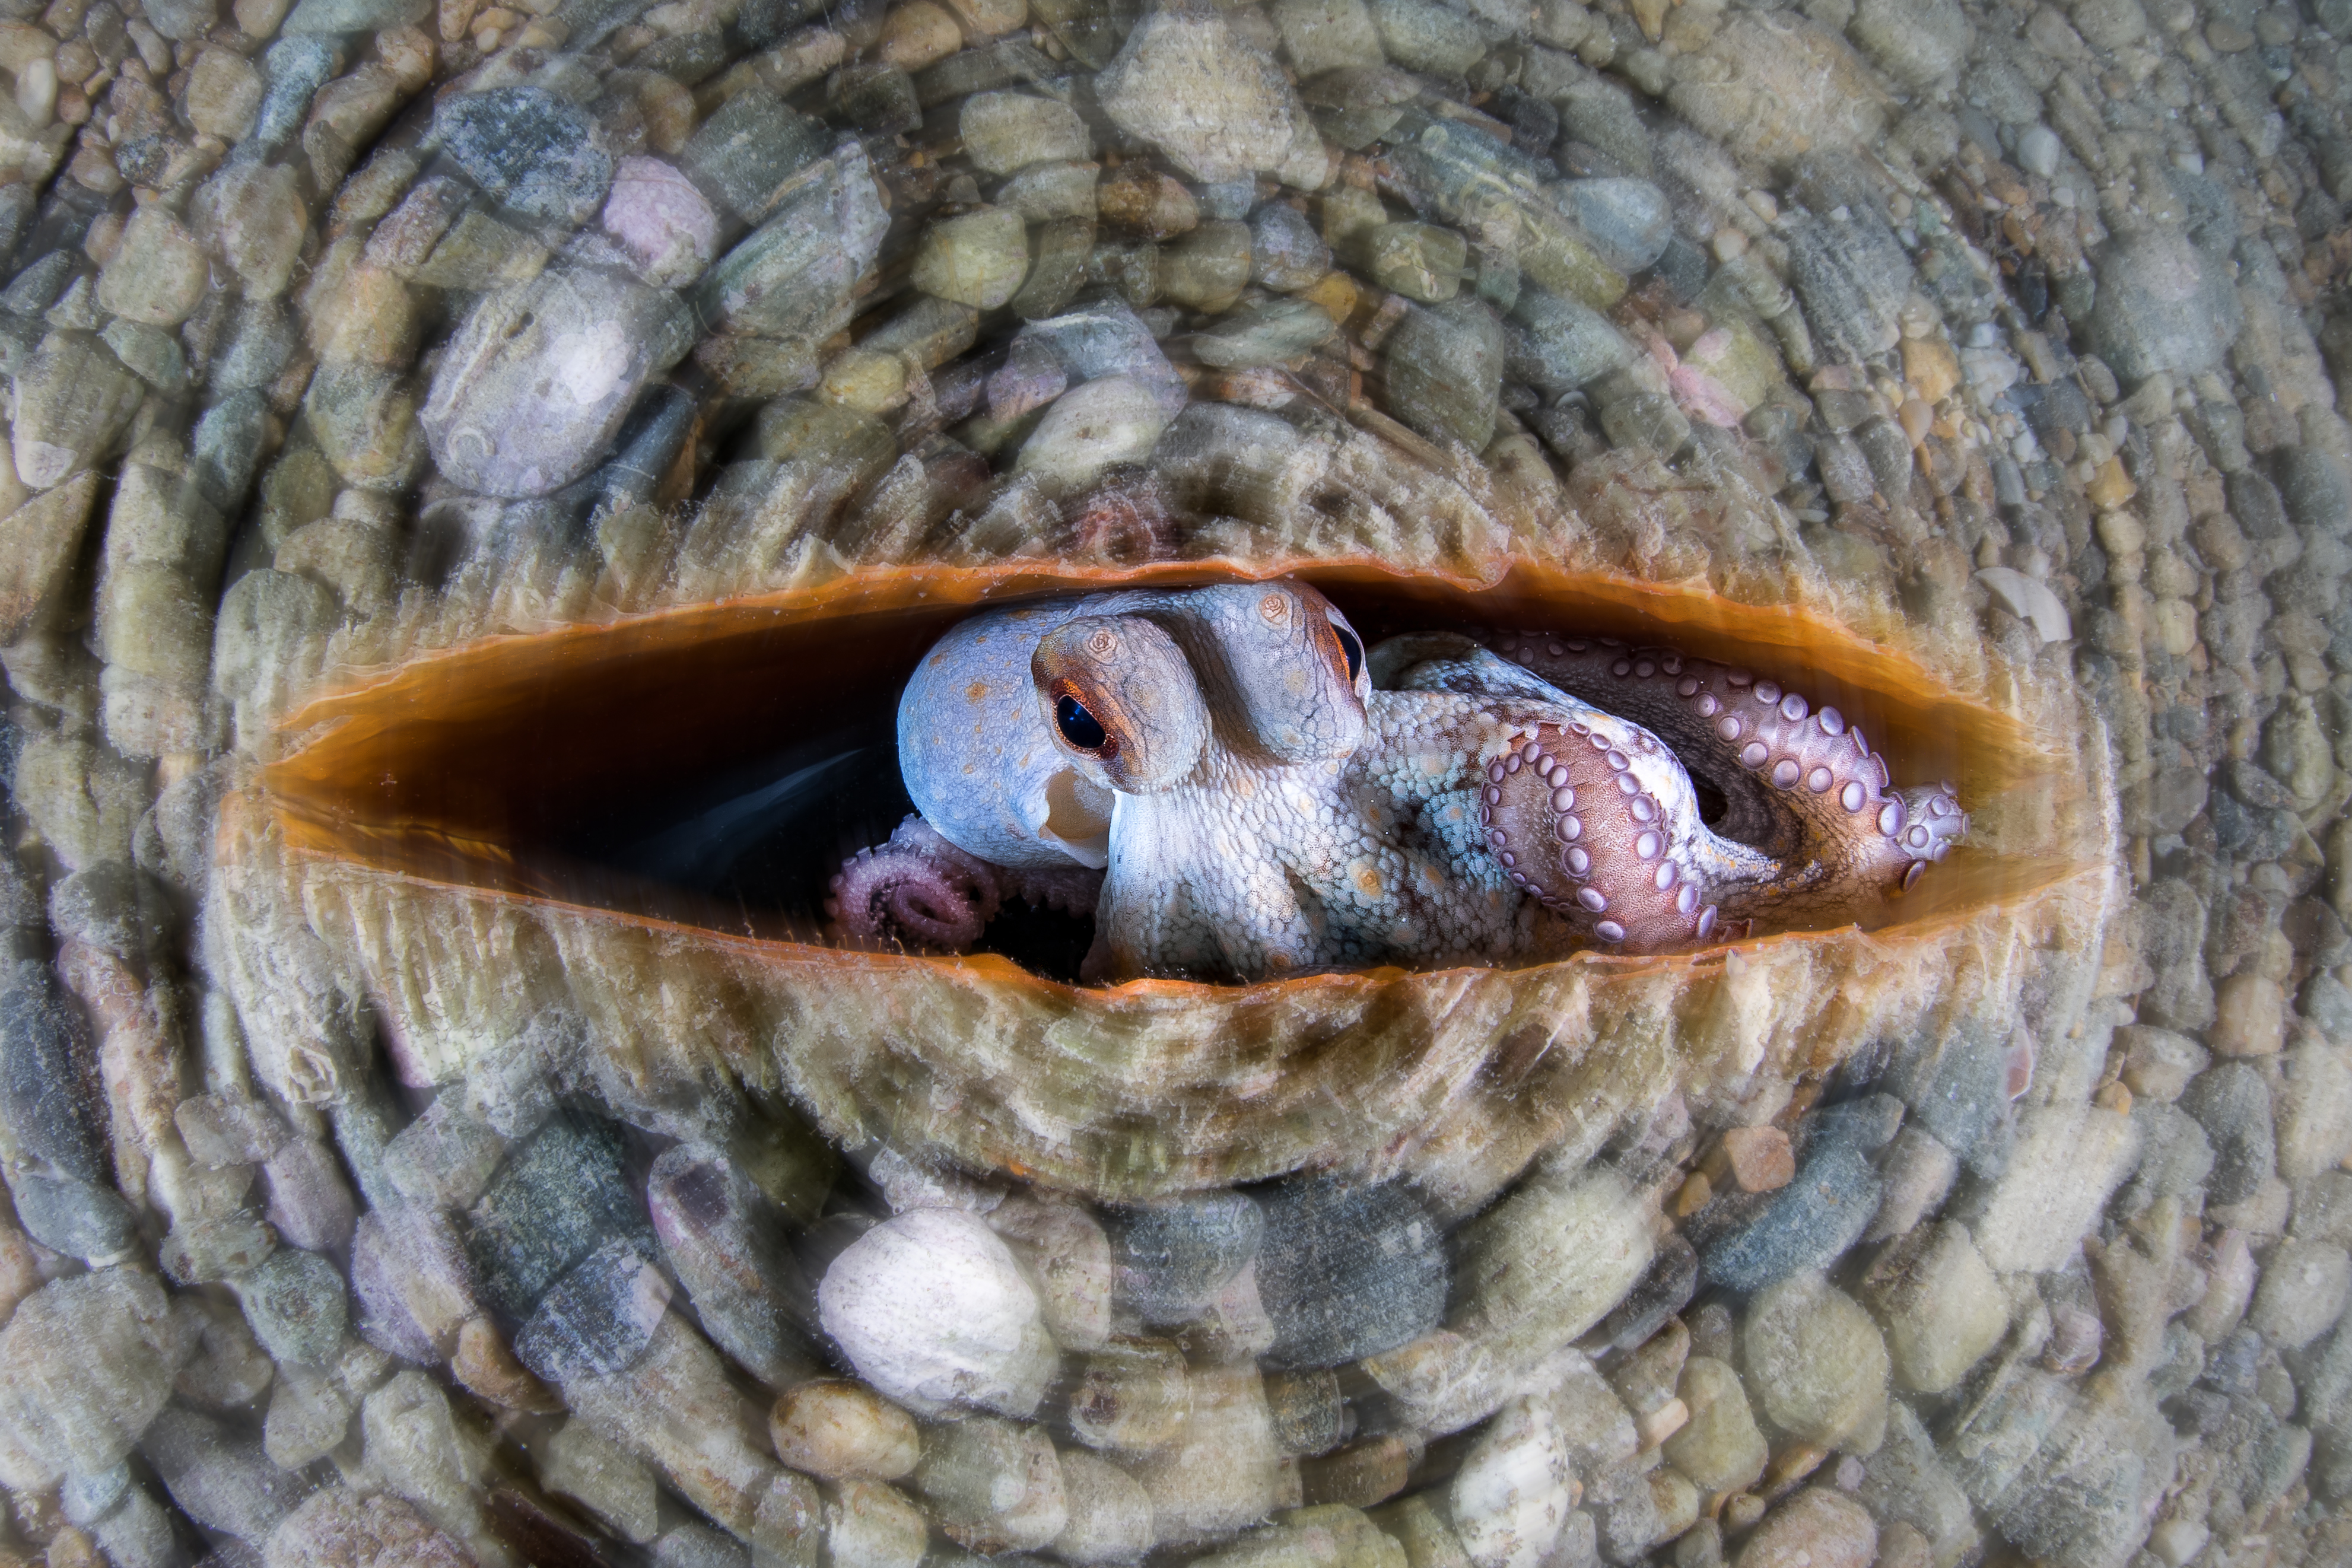 An octopus hiding in a large shell